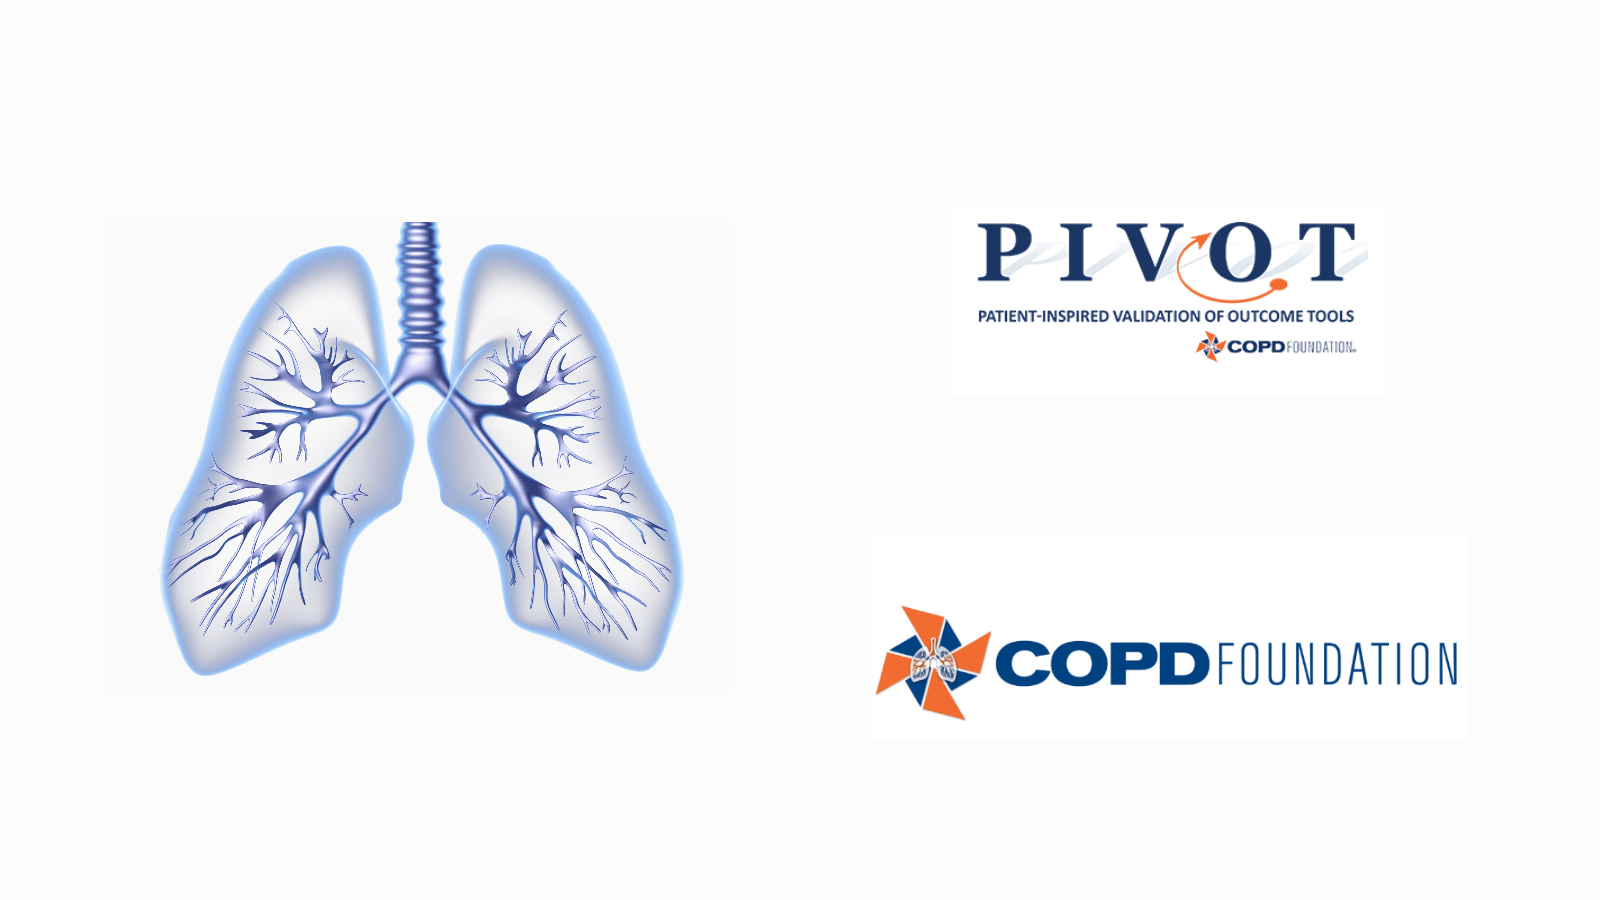 image of lungs and the logo of PIVOT, which stands for Patient-Inspired Validation of Outcome Tools